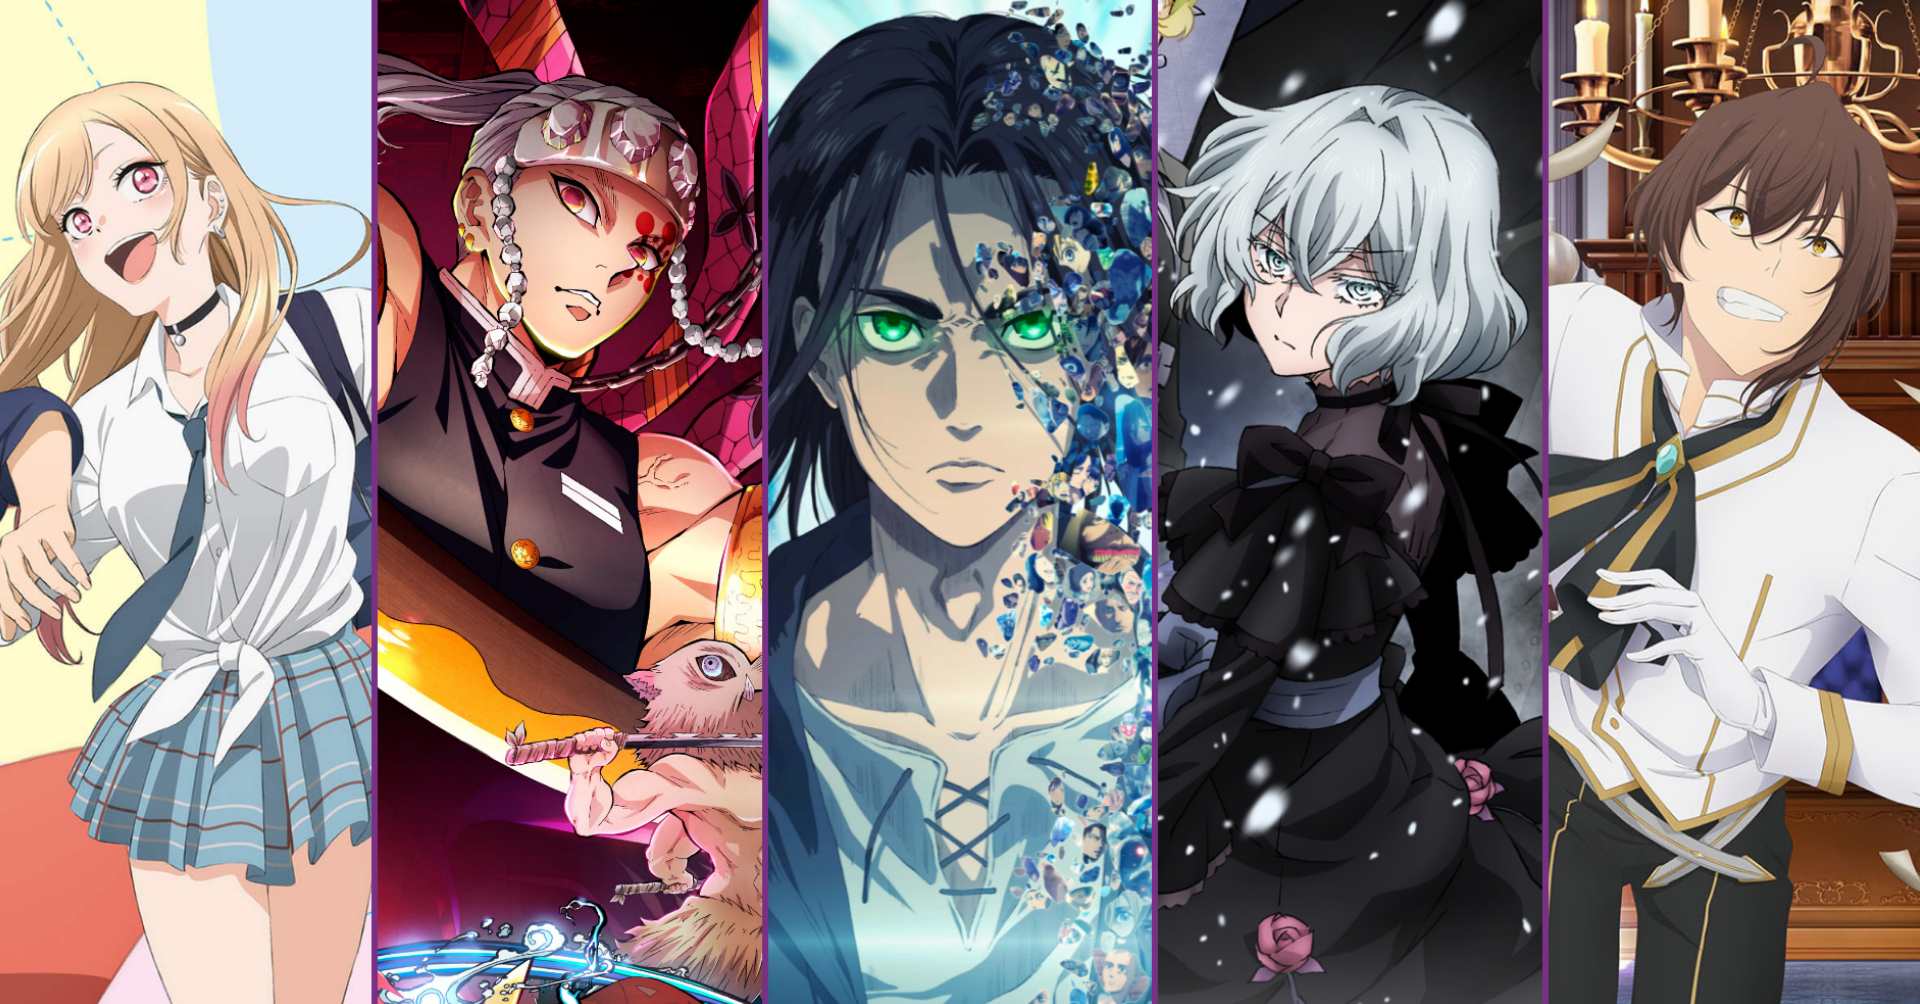 Crunchyroll Winter Anime Schedule Revealed, Features 40+ Series